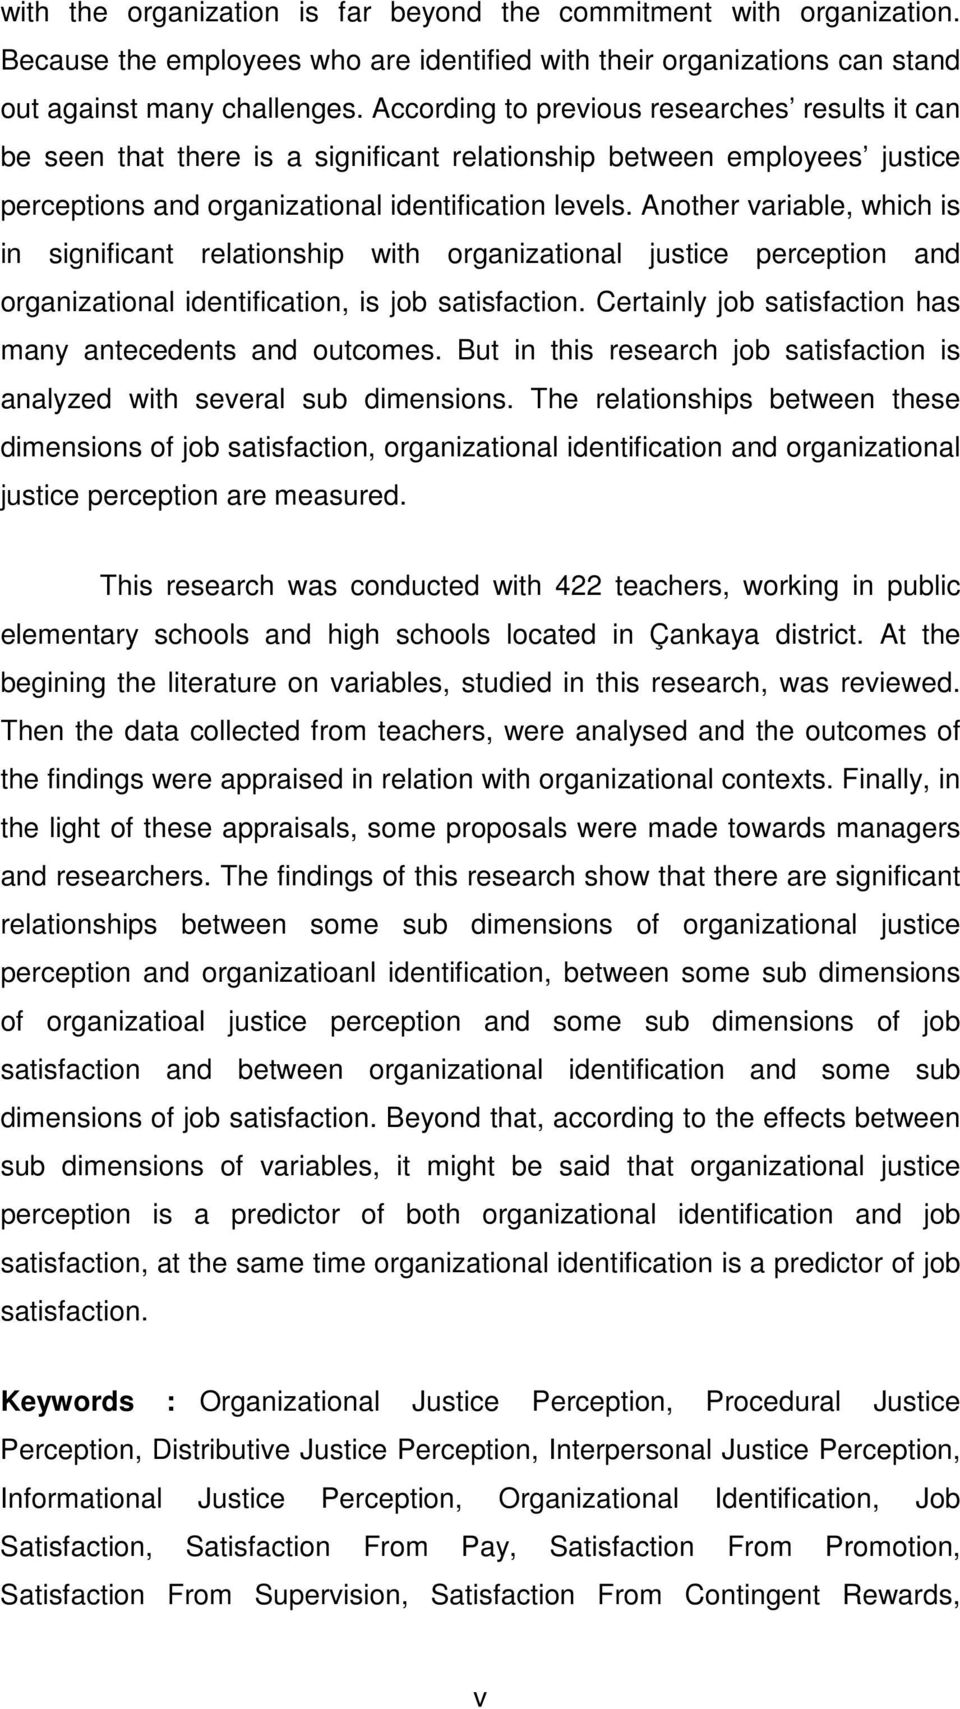 Another variable, which is in significant relationship with organizational justice perception and organizational identification, is job satisfaction.